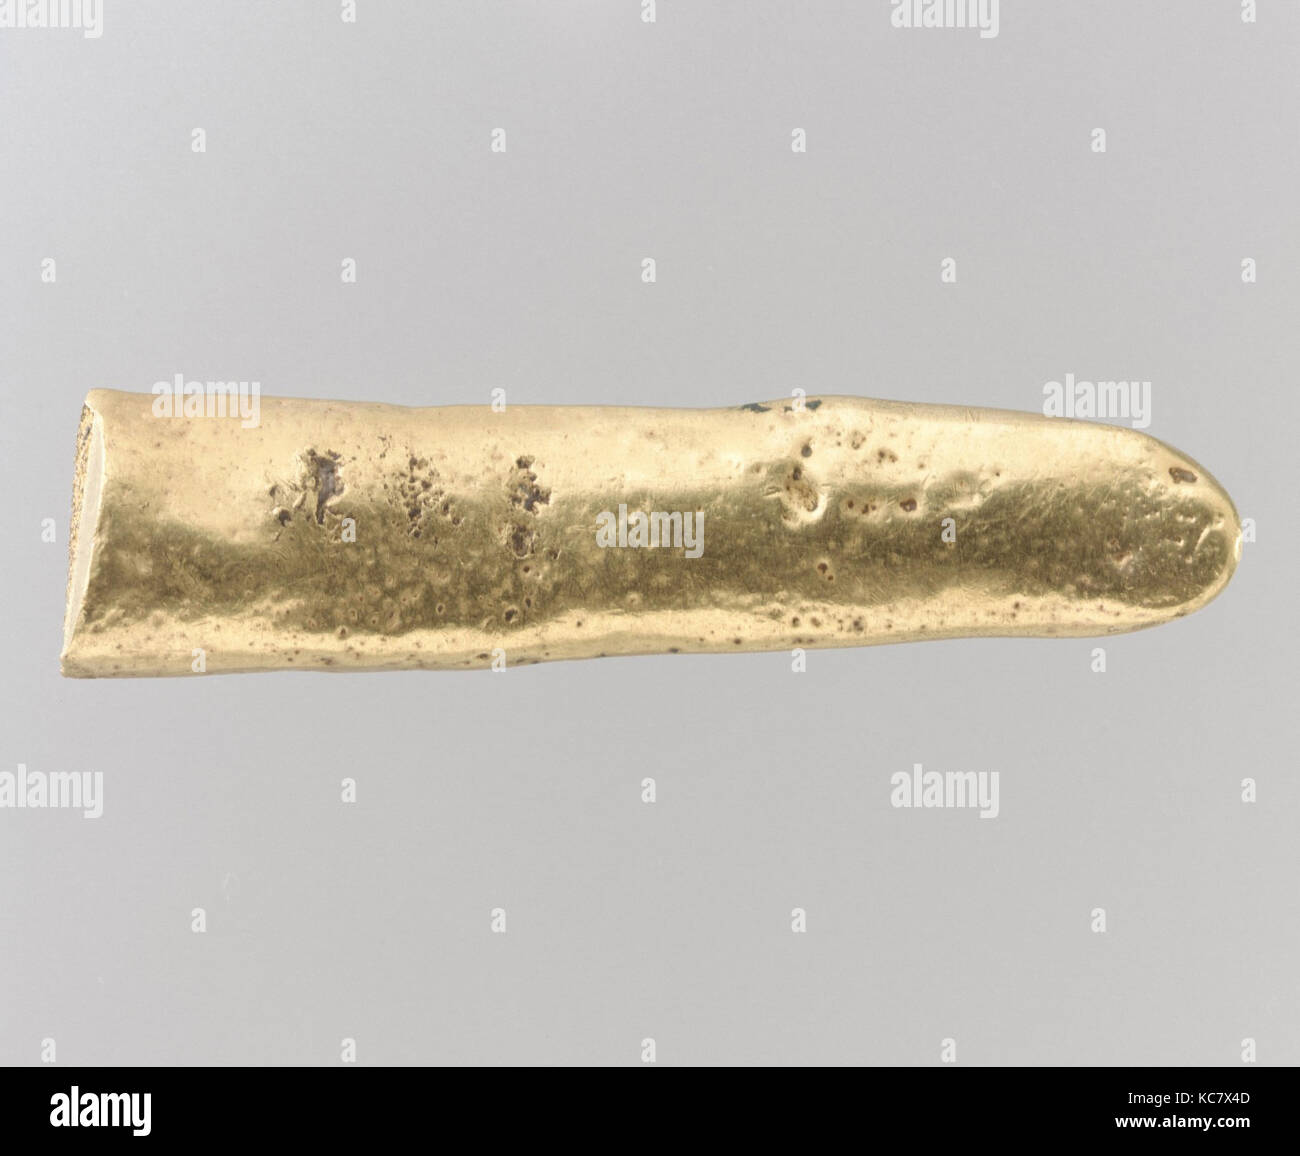 Fragment of a Gold Ingot, 700s, Avar, Gold, 2 11/16 × 11/16 × 3/8 in., 3.73 Troy Ounces (6.9 × 1.7 × 0.9 cm, 116g), Metalwork Stock Photo